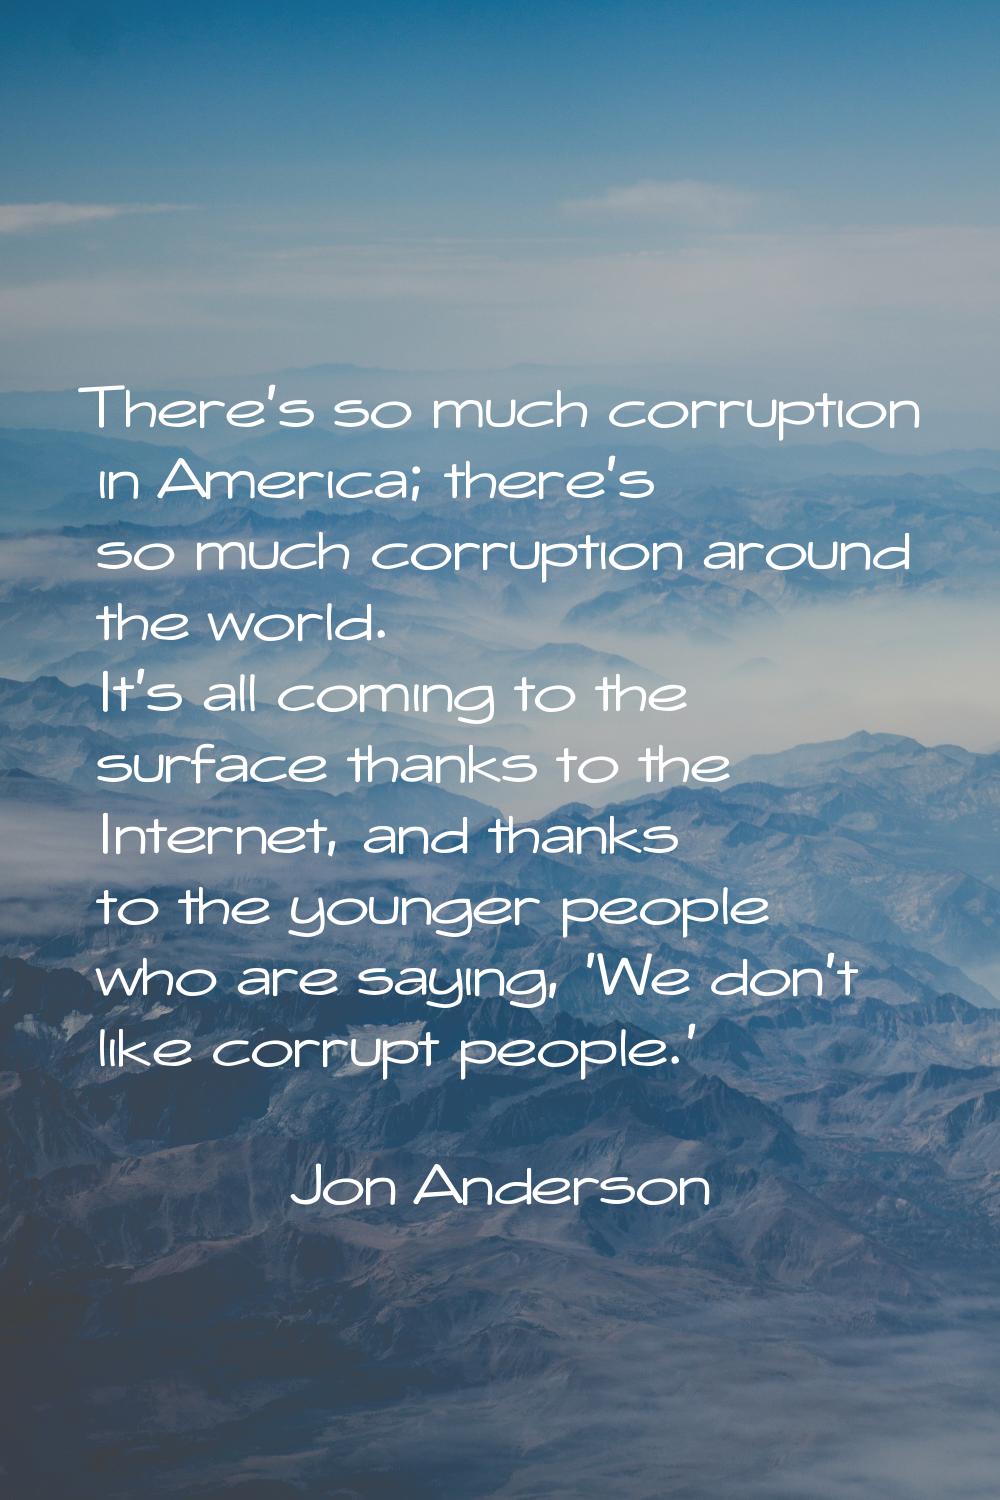 There's so much corruption in America; there's so much corruption around the world. It's all coming